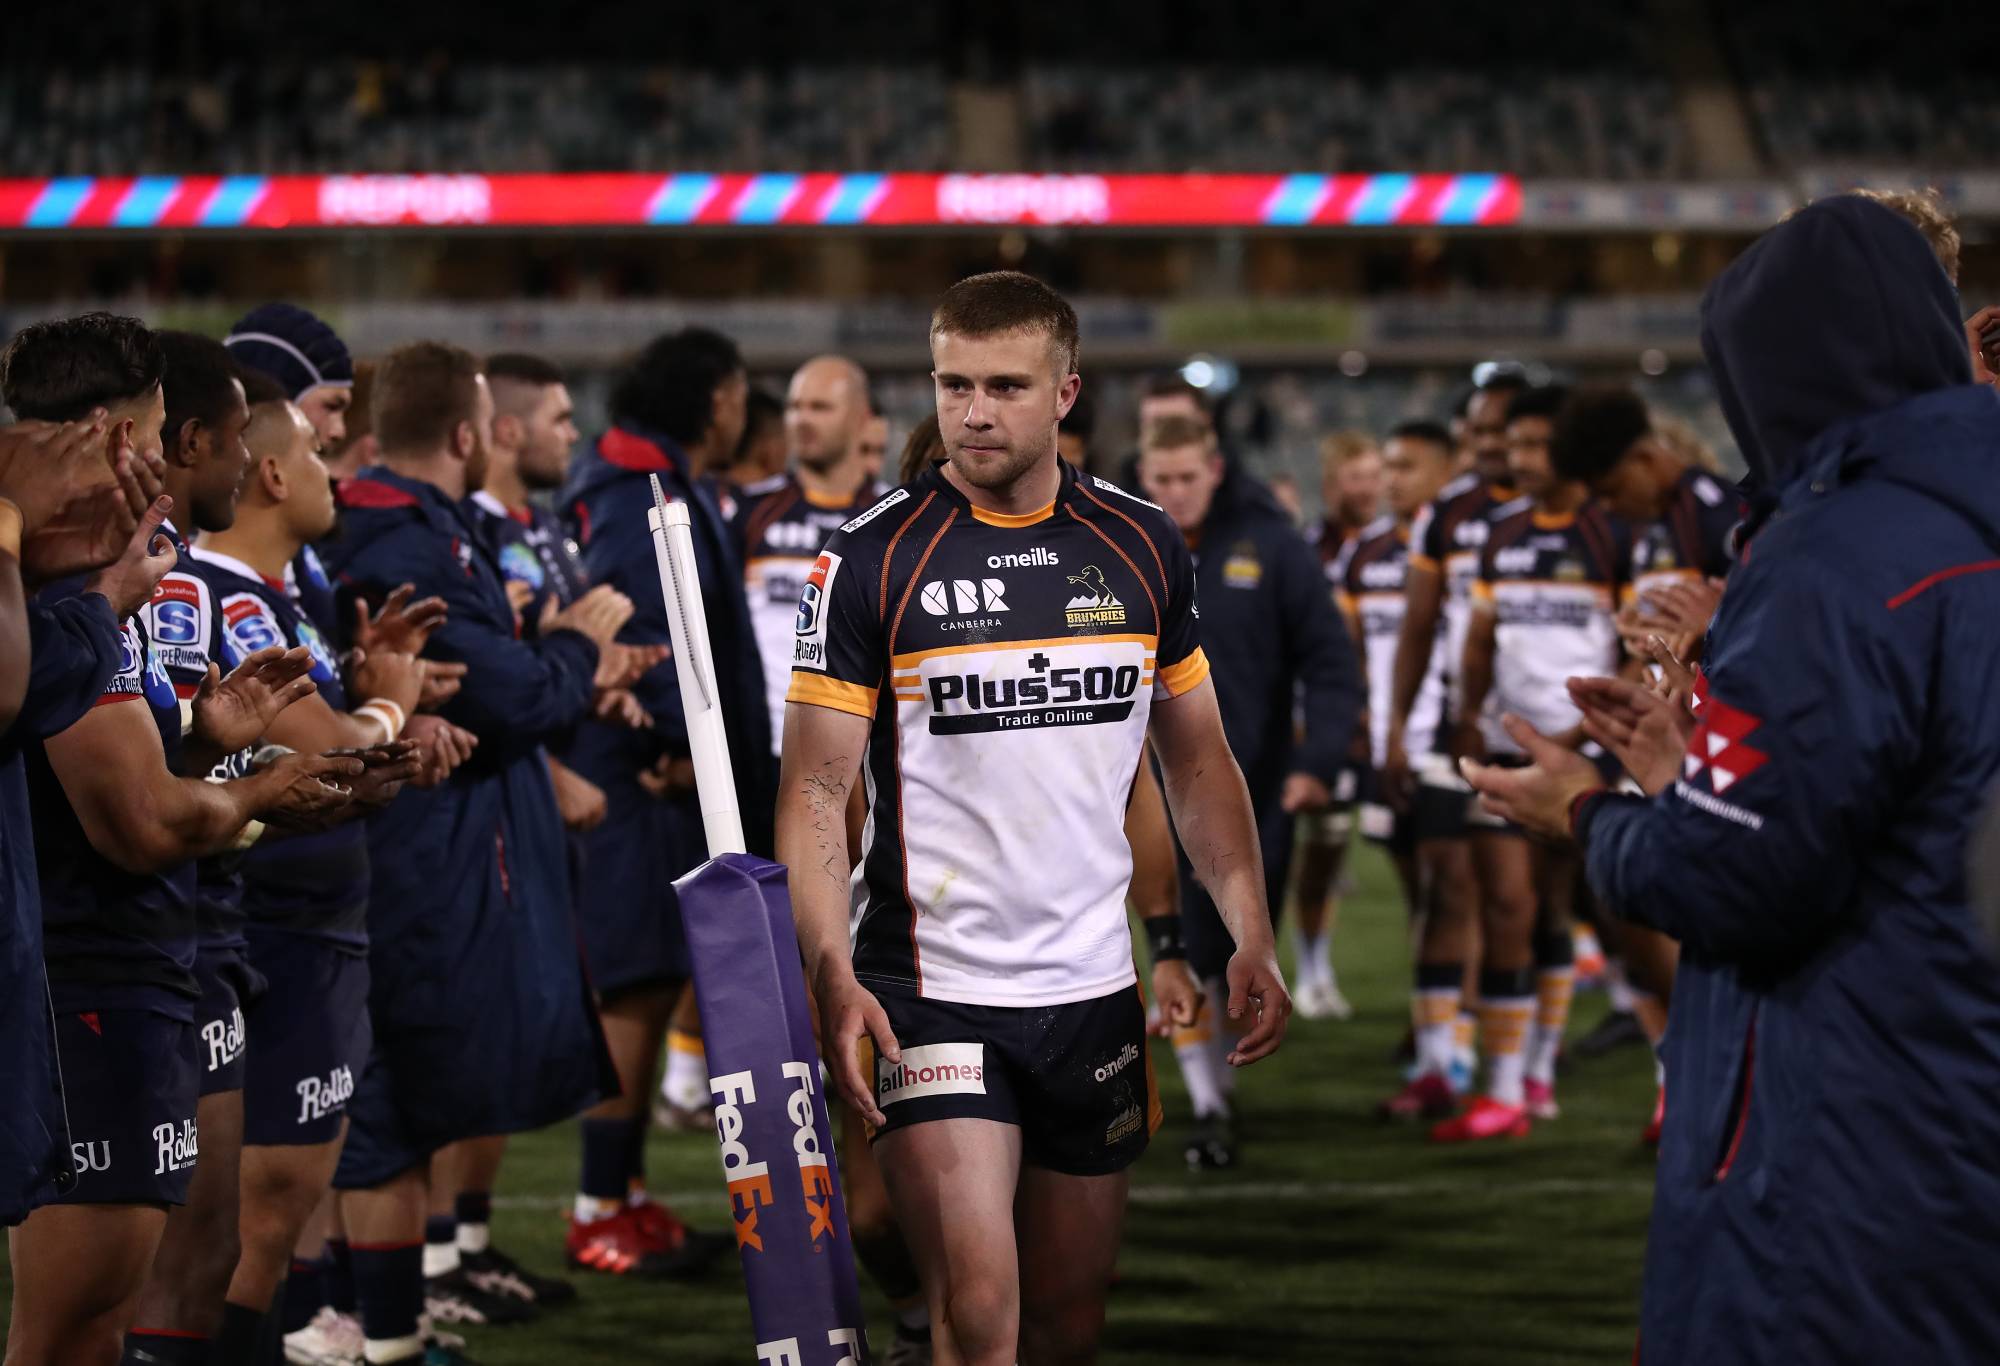 Mack Hansen of the Brumbies and team mates are cheered off after they defeated the Rebels during the round one Super Rugby AU match between the Brumbies and the Rebels at GIO Stadium on July 04, 2020 in Canberra, Australia. (Photo by Cameron Spencer/Getty Images)